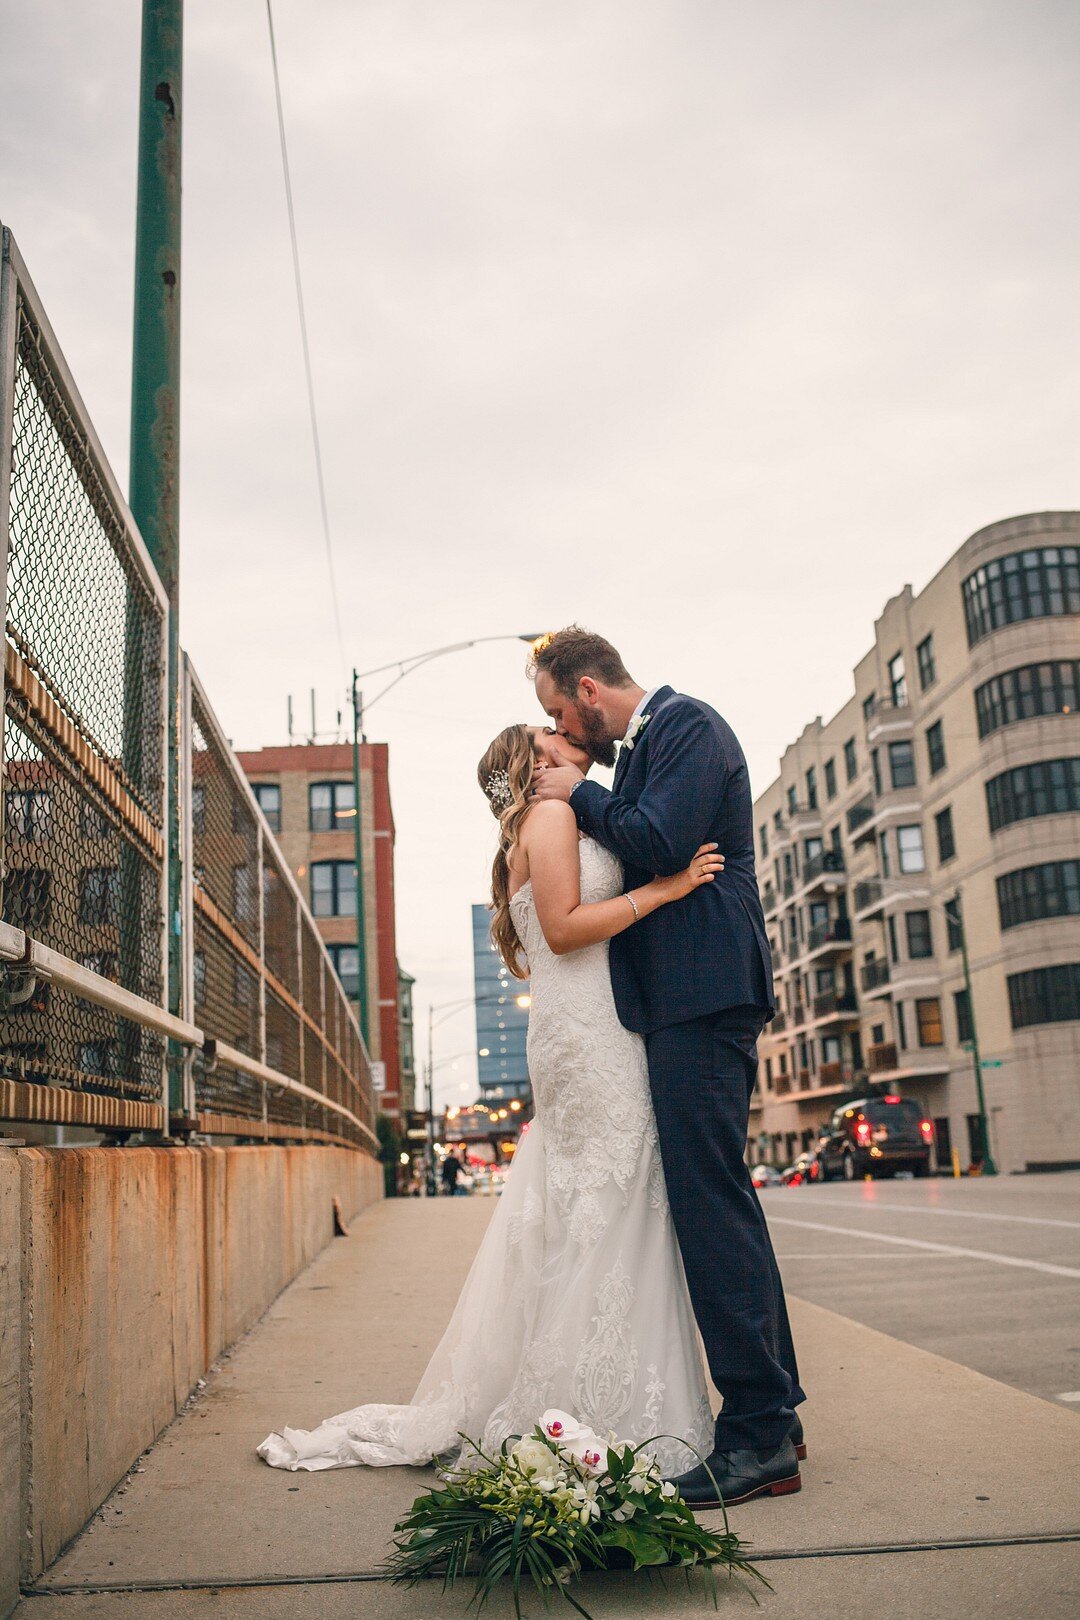 Chic Elemental Chicago Wedding captured by Cinder and Vin Photography. See more unique wedding ideas at CHItheeWED.com!